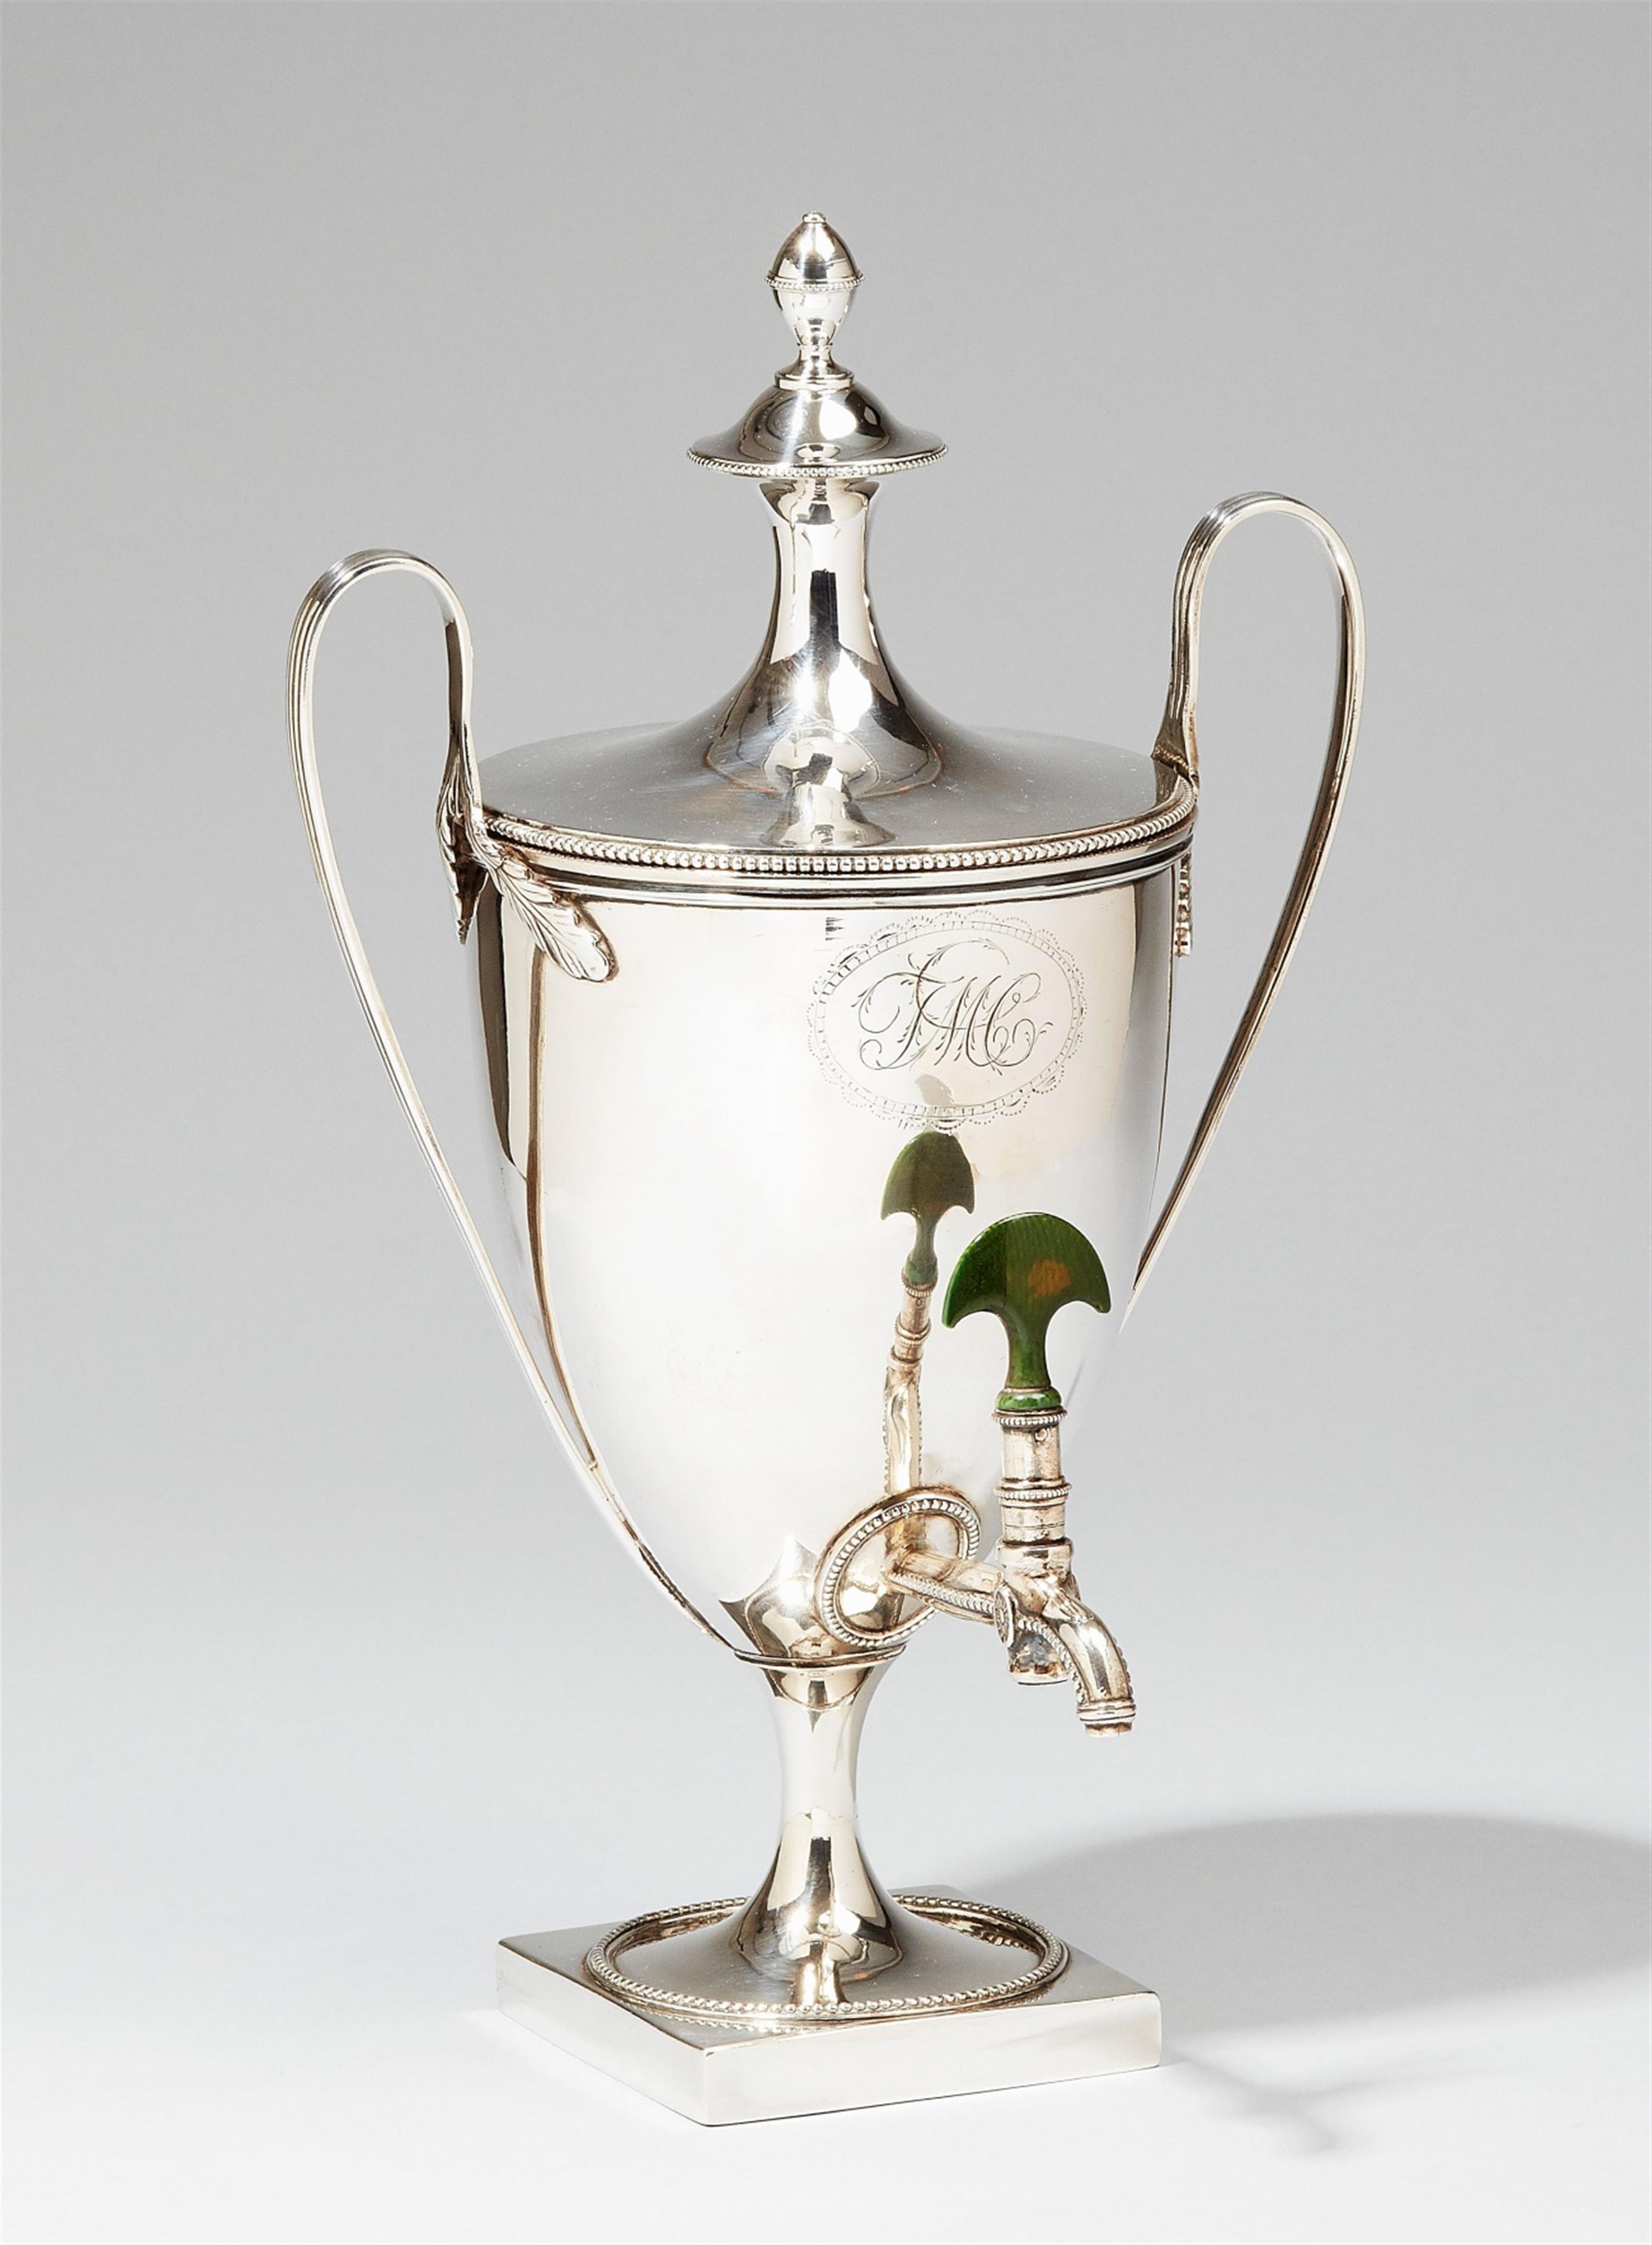 A George III London silver tea machine. The tap handle of ivory. Monogrammed "JMC". Marks of Thomas Chawner, 1784. - image-1